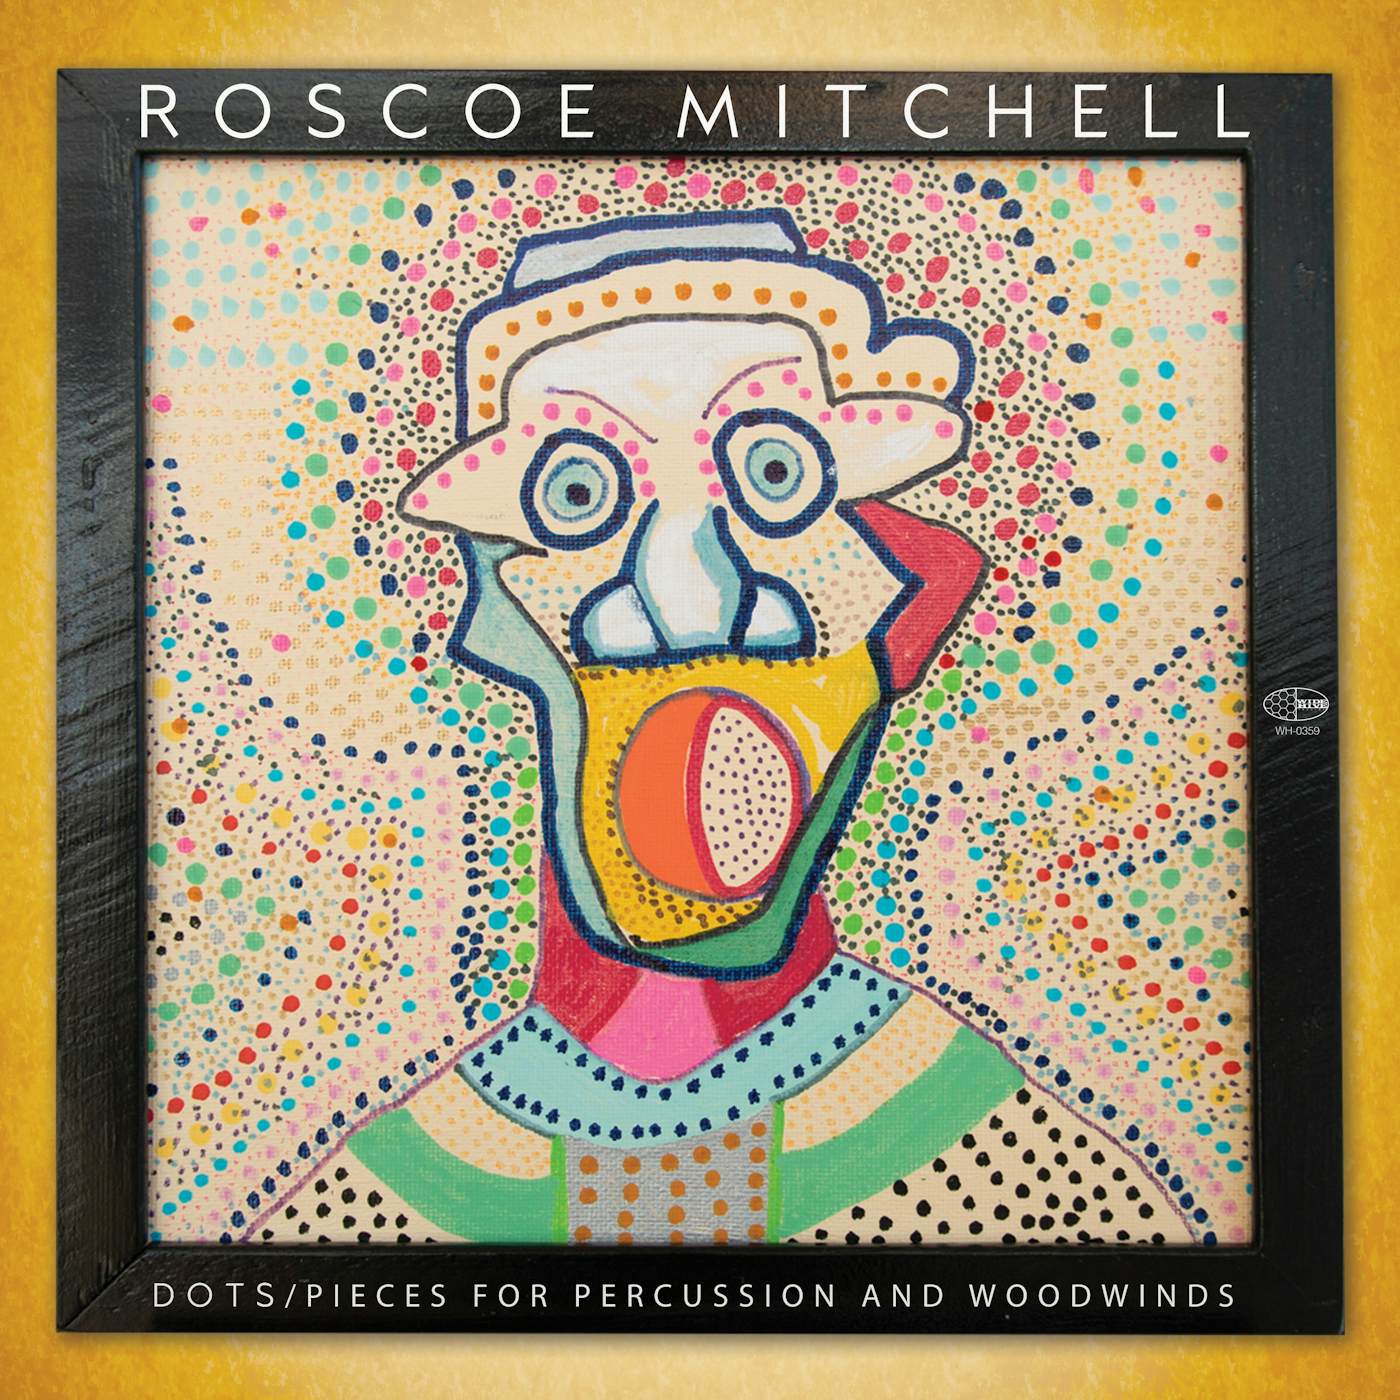 Roscoe Mitchell DOTS / PIECES FOR PERCUSSION AND WOODWINDS Vinyl Record